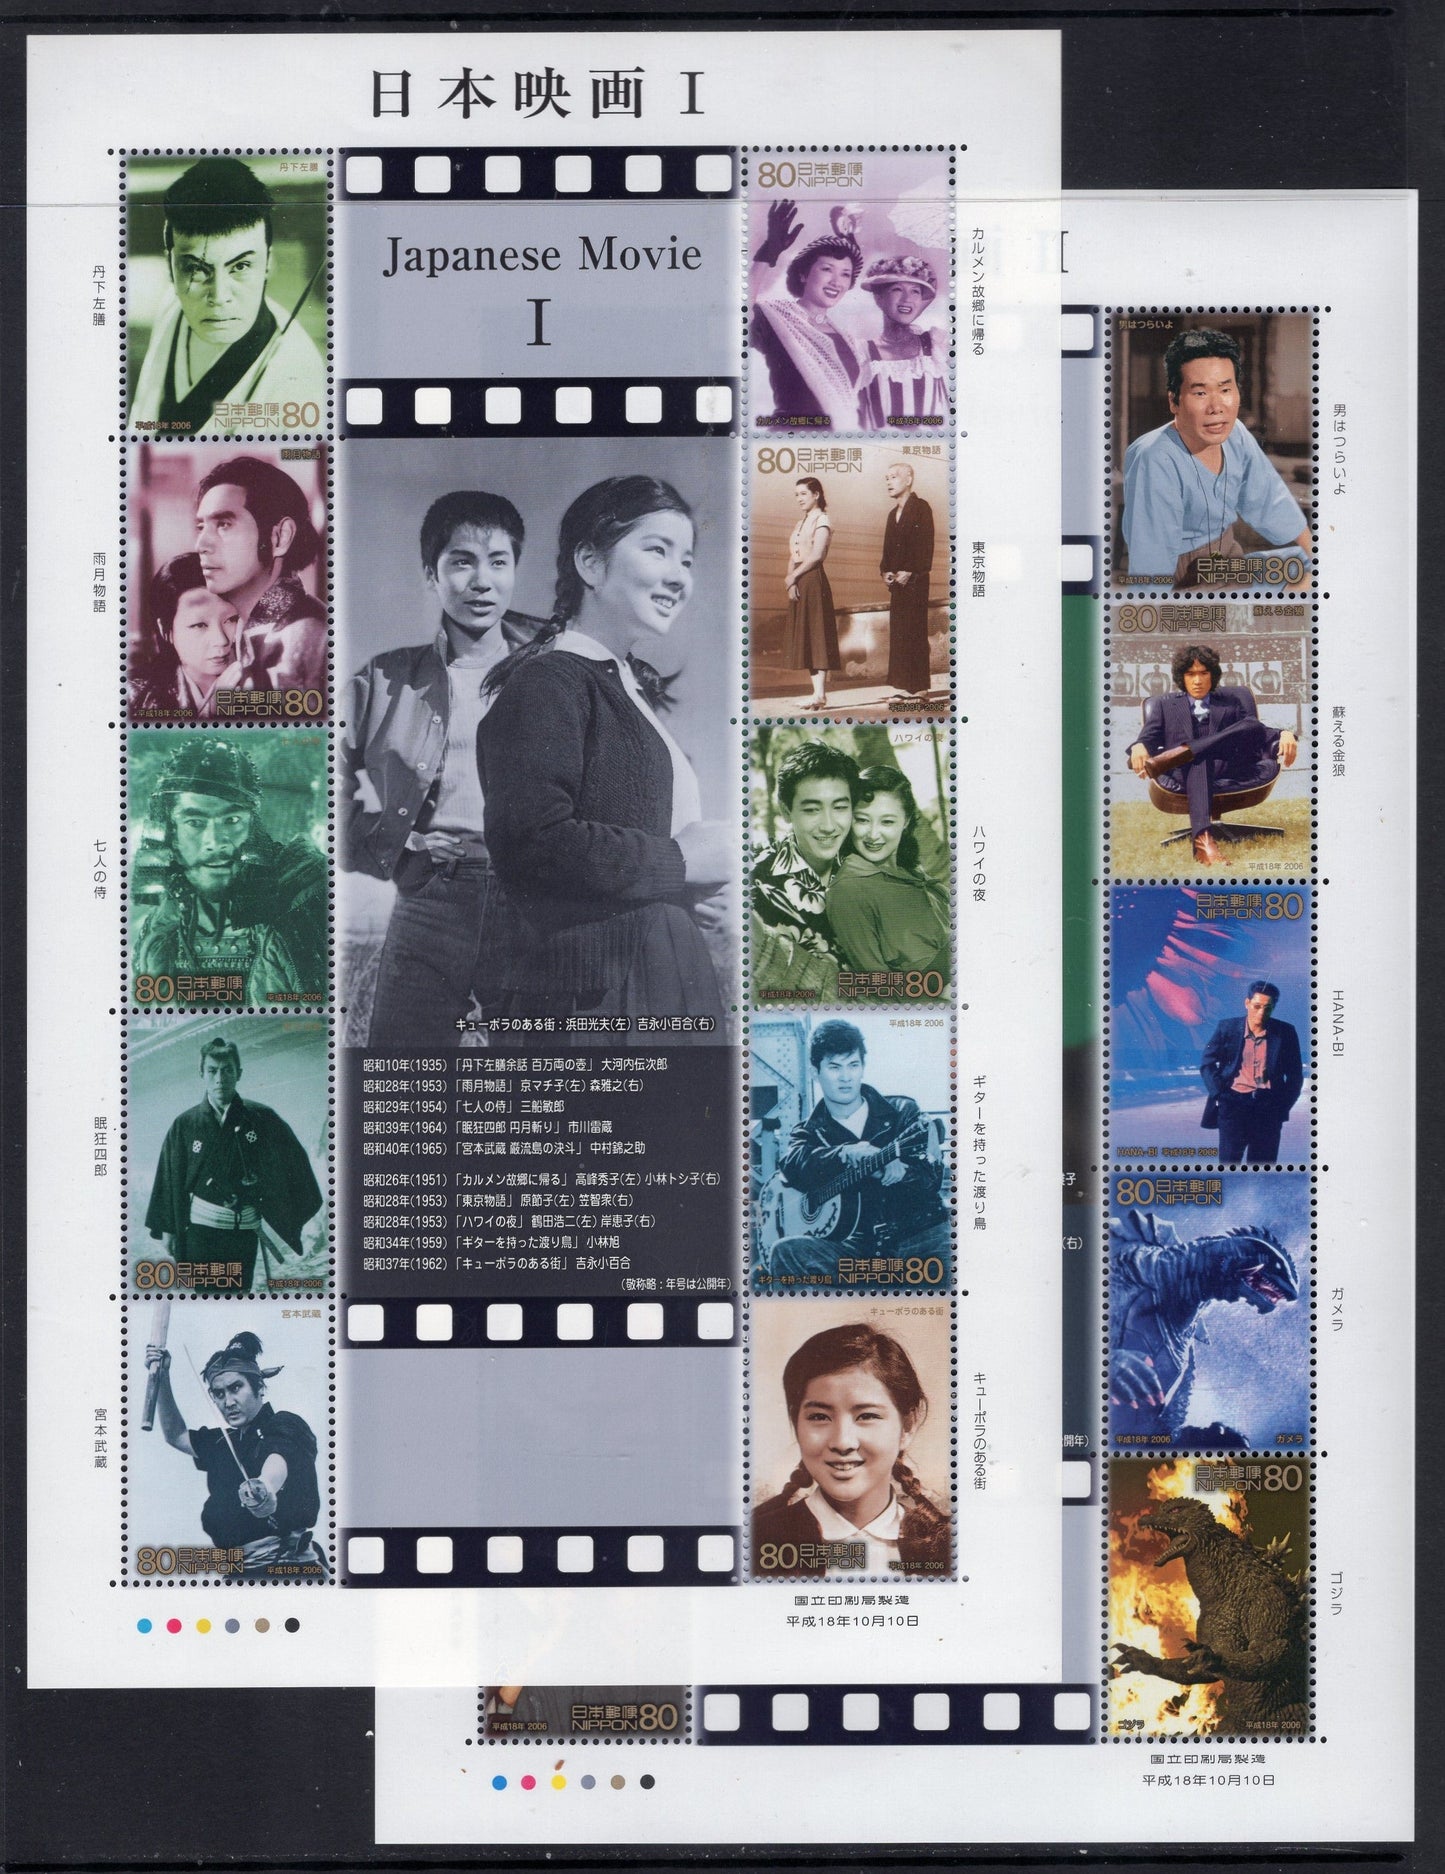 JAPAN - SCENES FROM JAPANESE MOVIES in 2 Sheet of 10 Stamps each.  issued on October 10, 2006